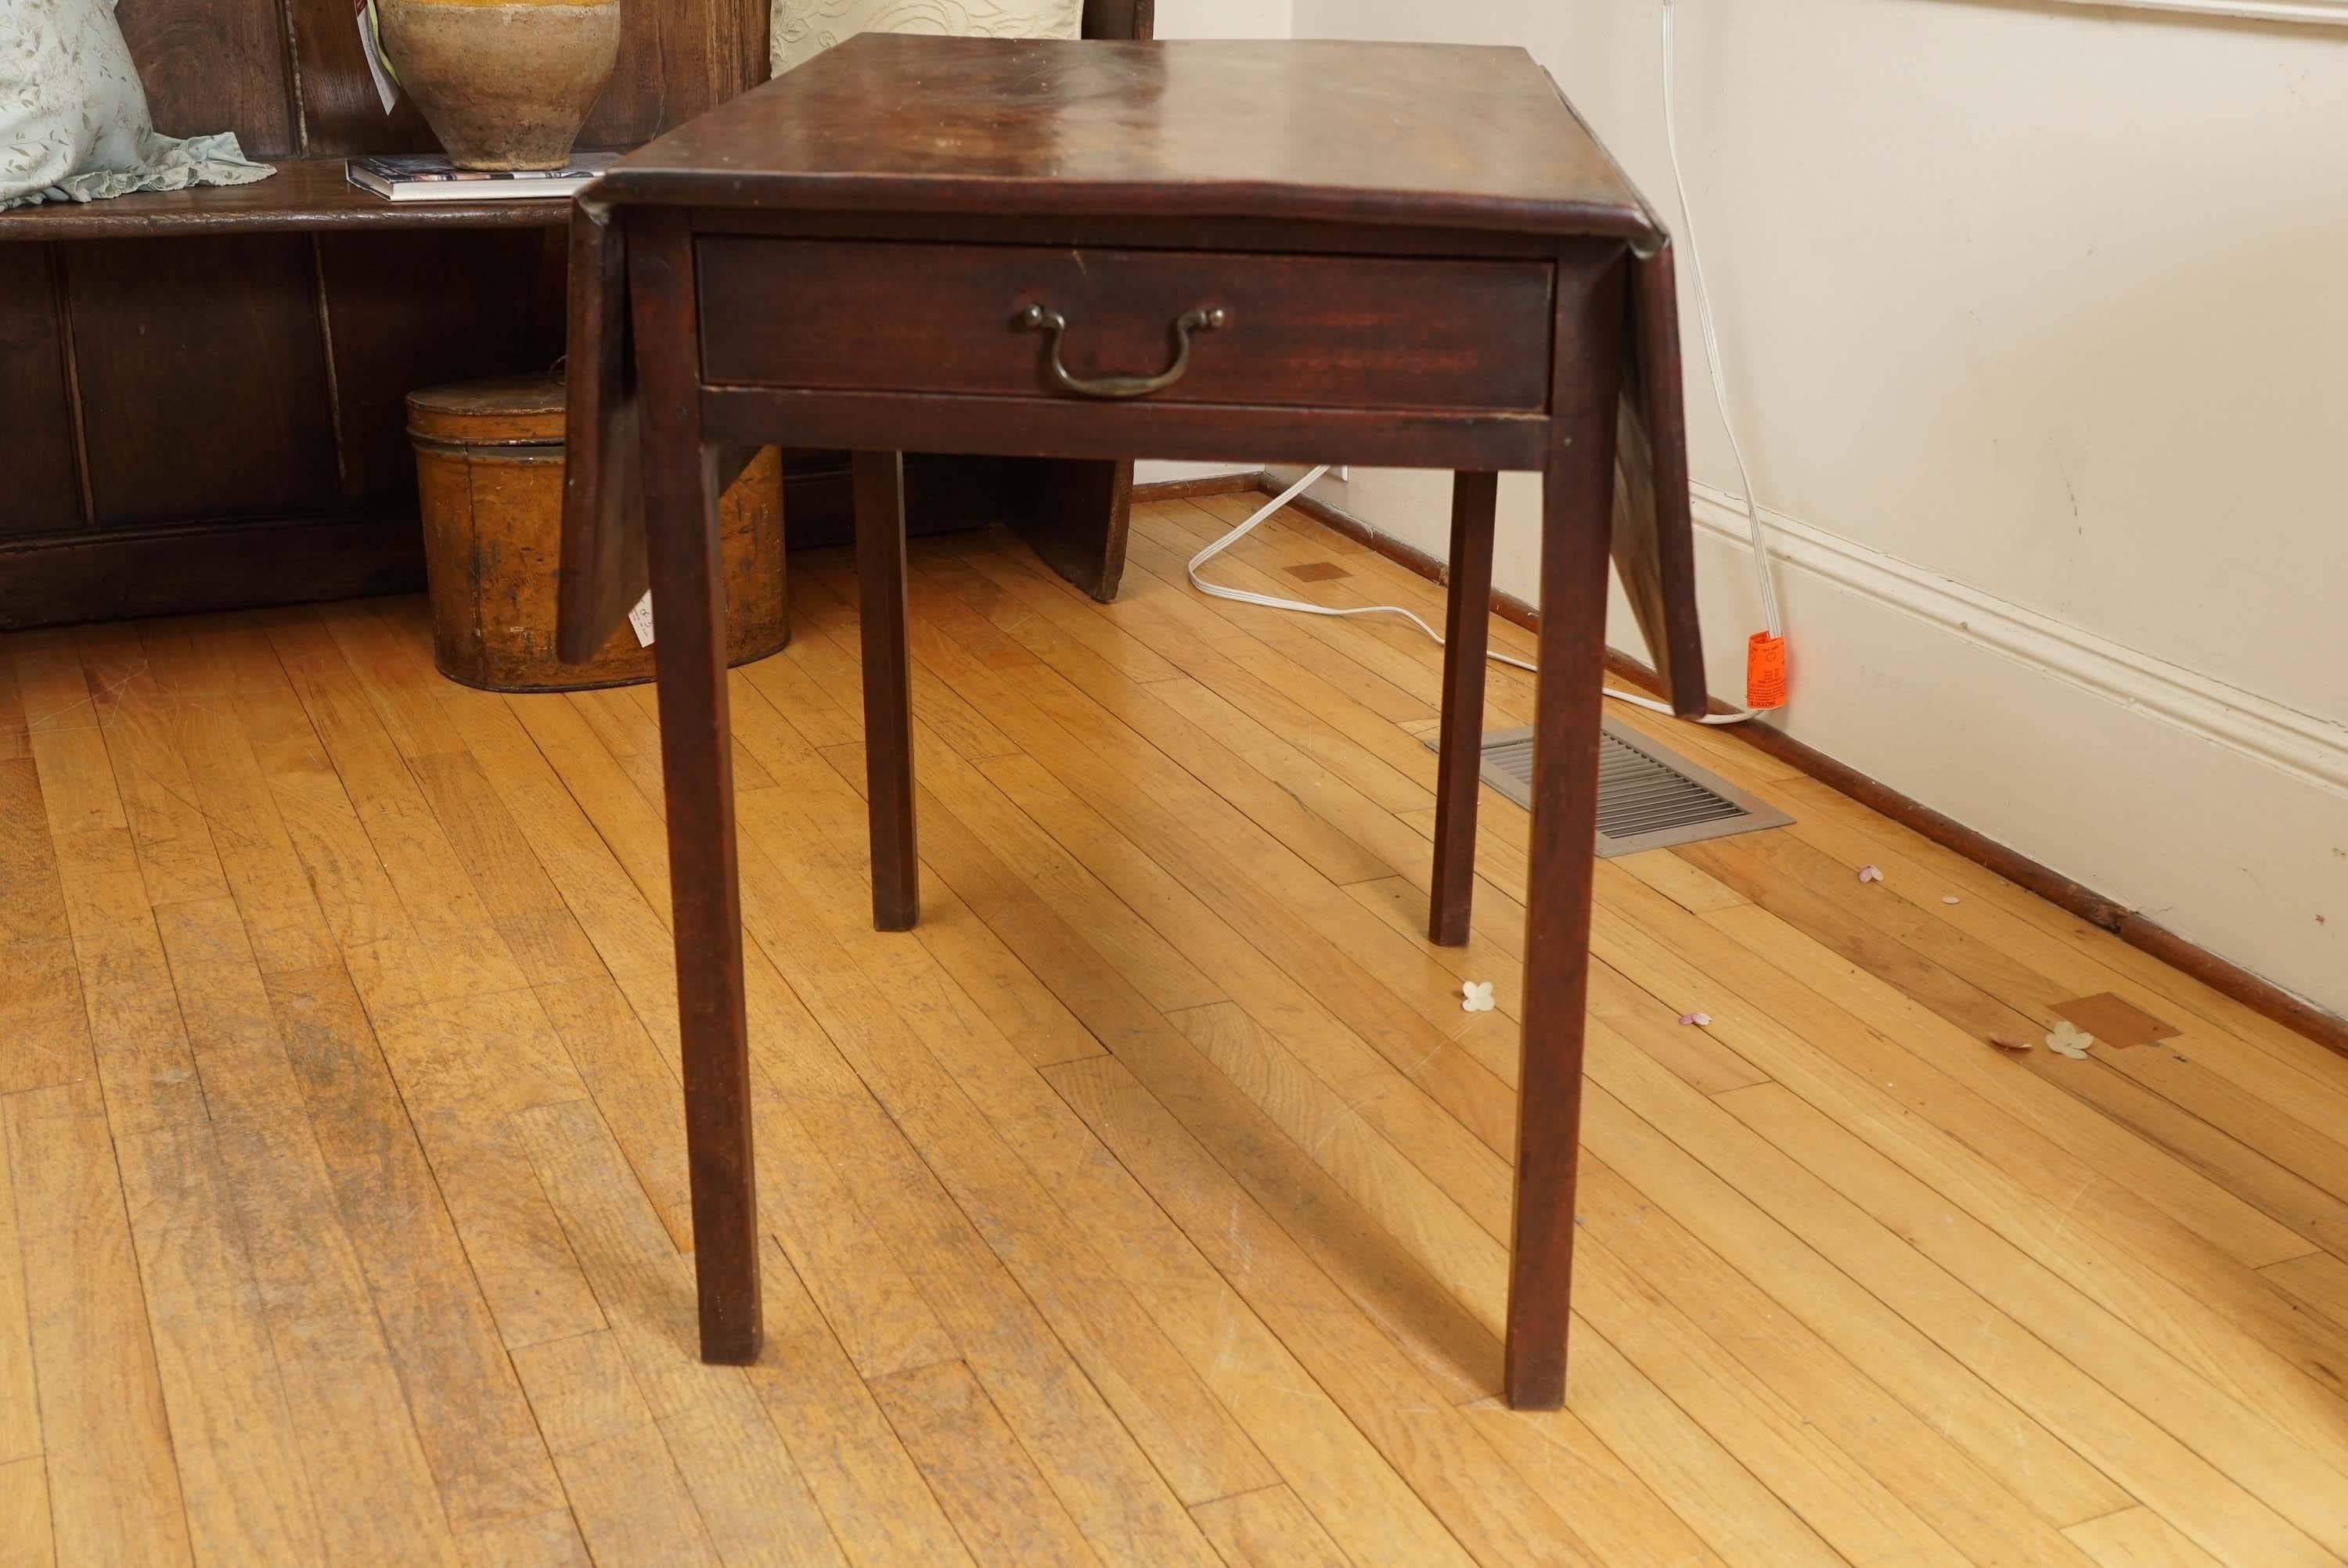 Its all about the wood! The richness of mahogany will not get lost here. This very old piece has one end drawer with original brass handle and would be a stunning end or side table in any room in the house. It works beautifully and has no flaws.